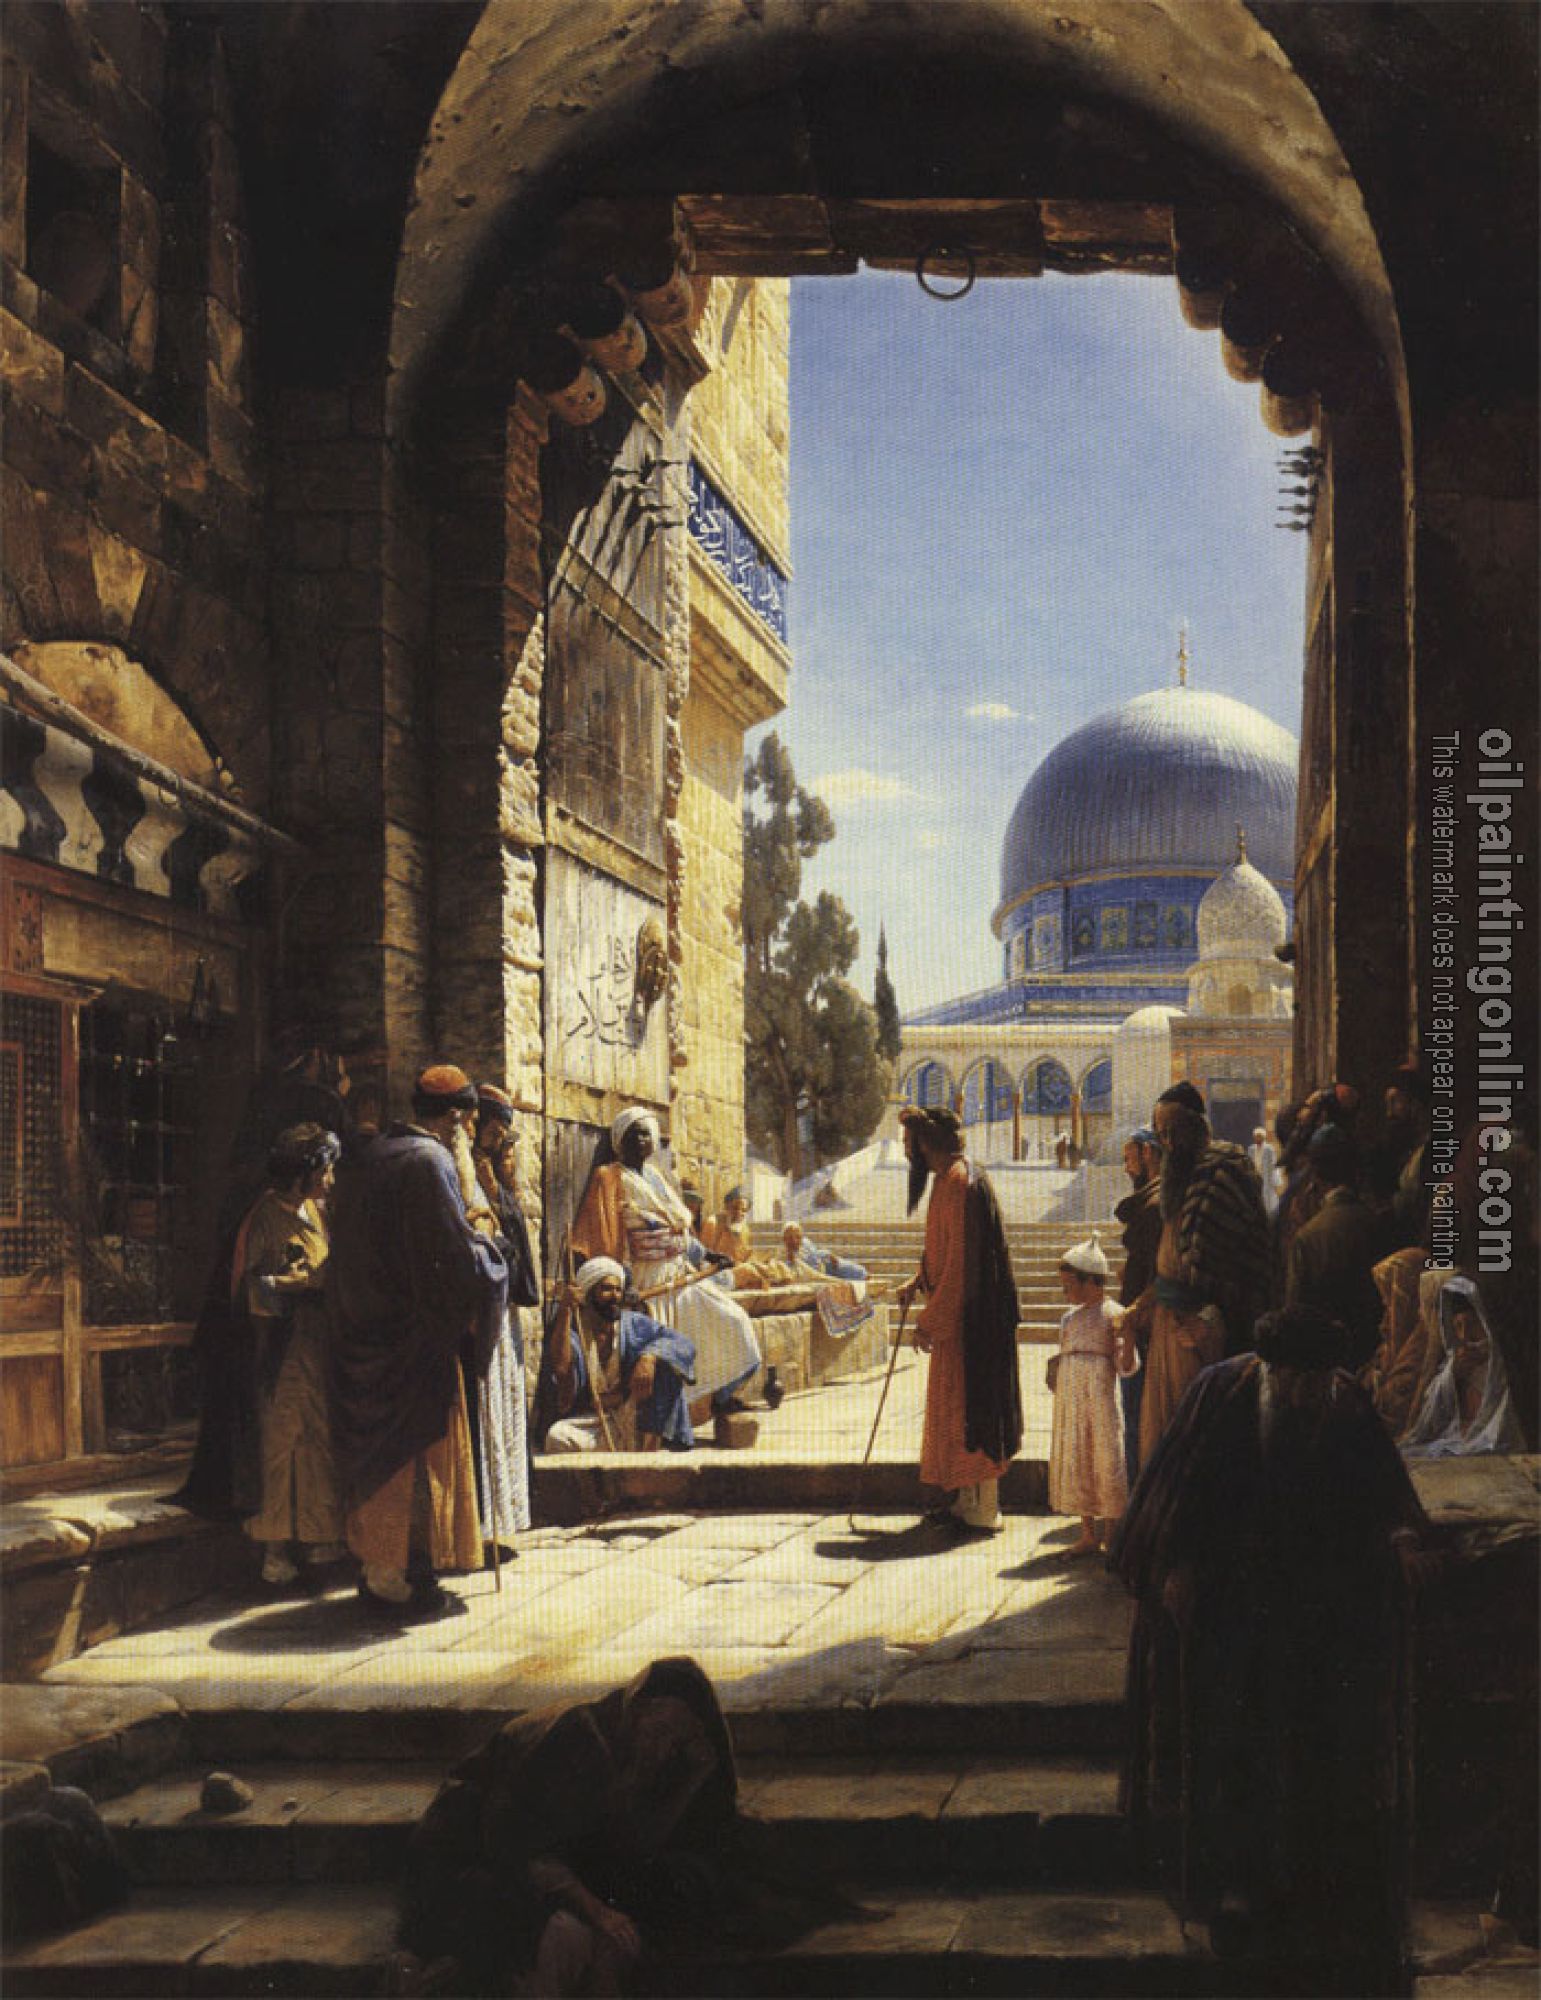 Bauernfiend, Gustav - At the Entrance to the Temple Mount, Jerusalem